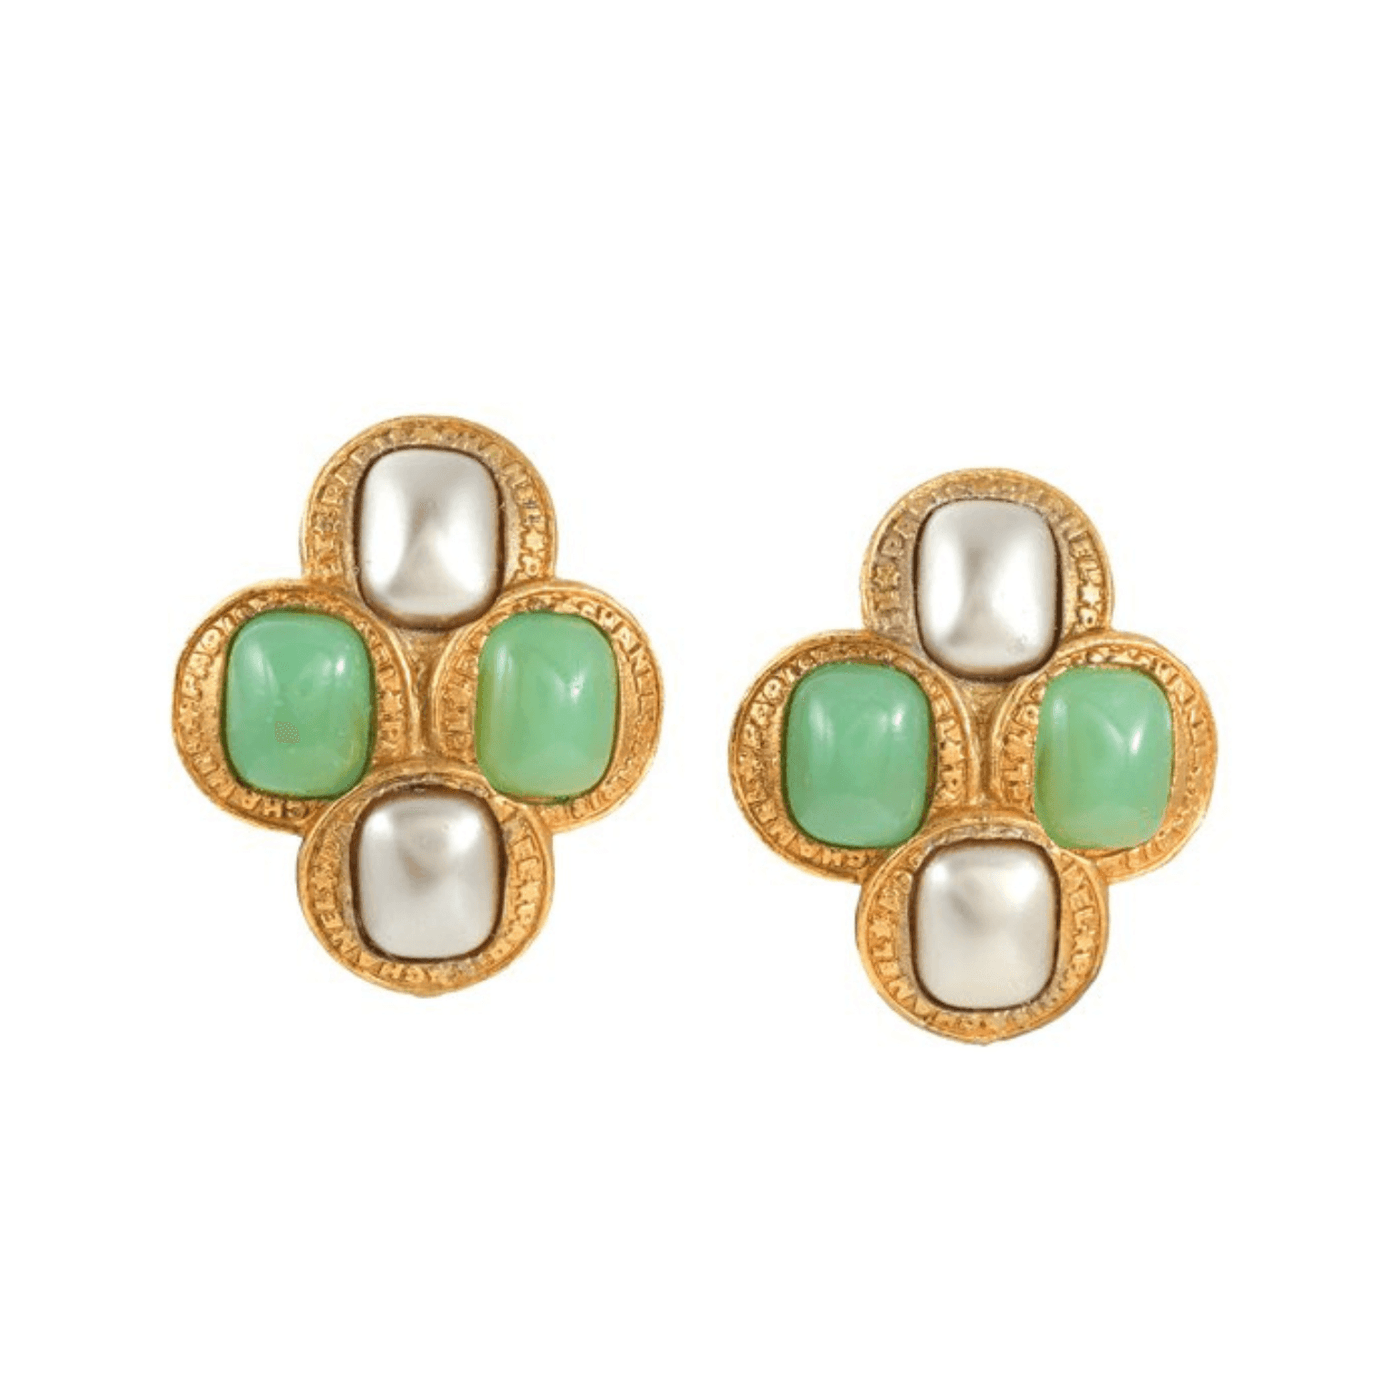 Chanel Green Gripoix and Pearl Earrings - Only Authentics